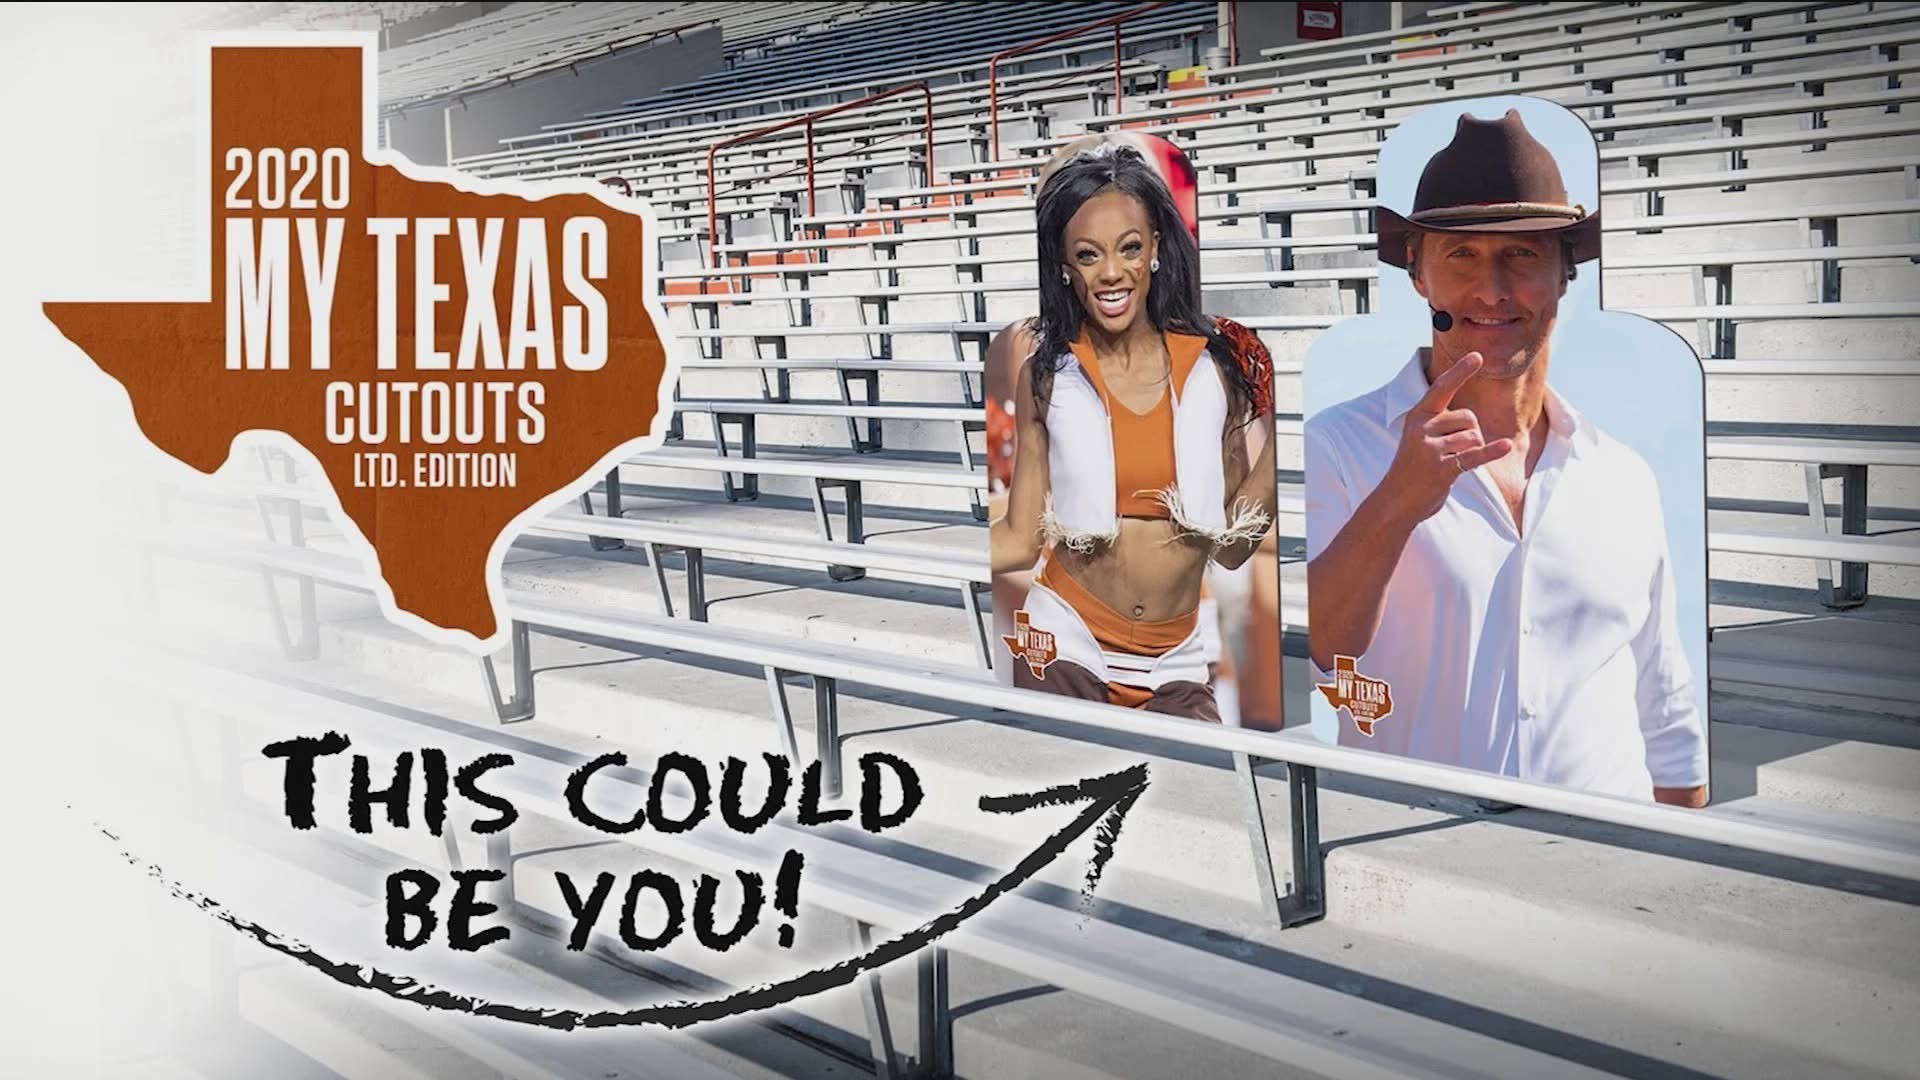 For $50, you can have a spot in the stands at a Texas Longhorns game ... sort-of.